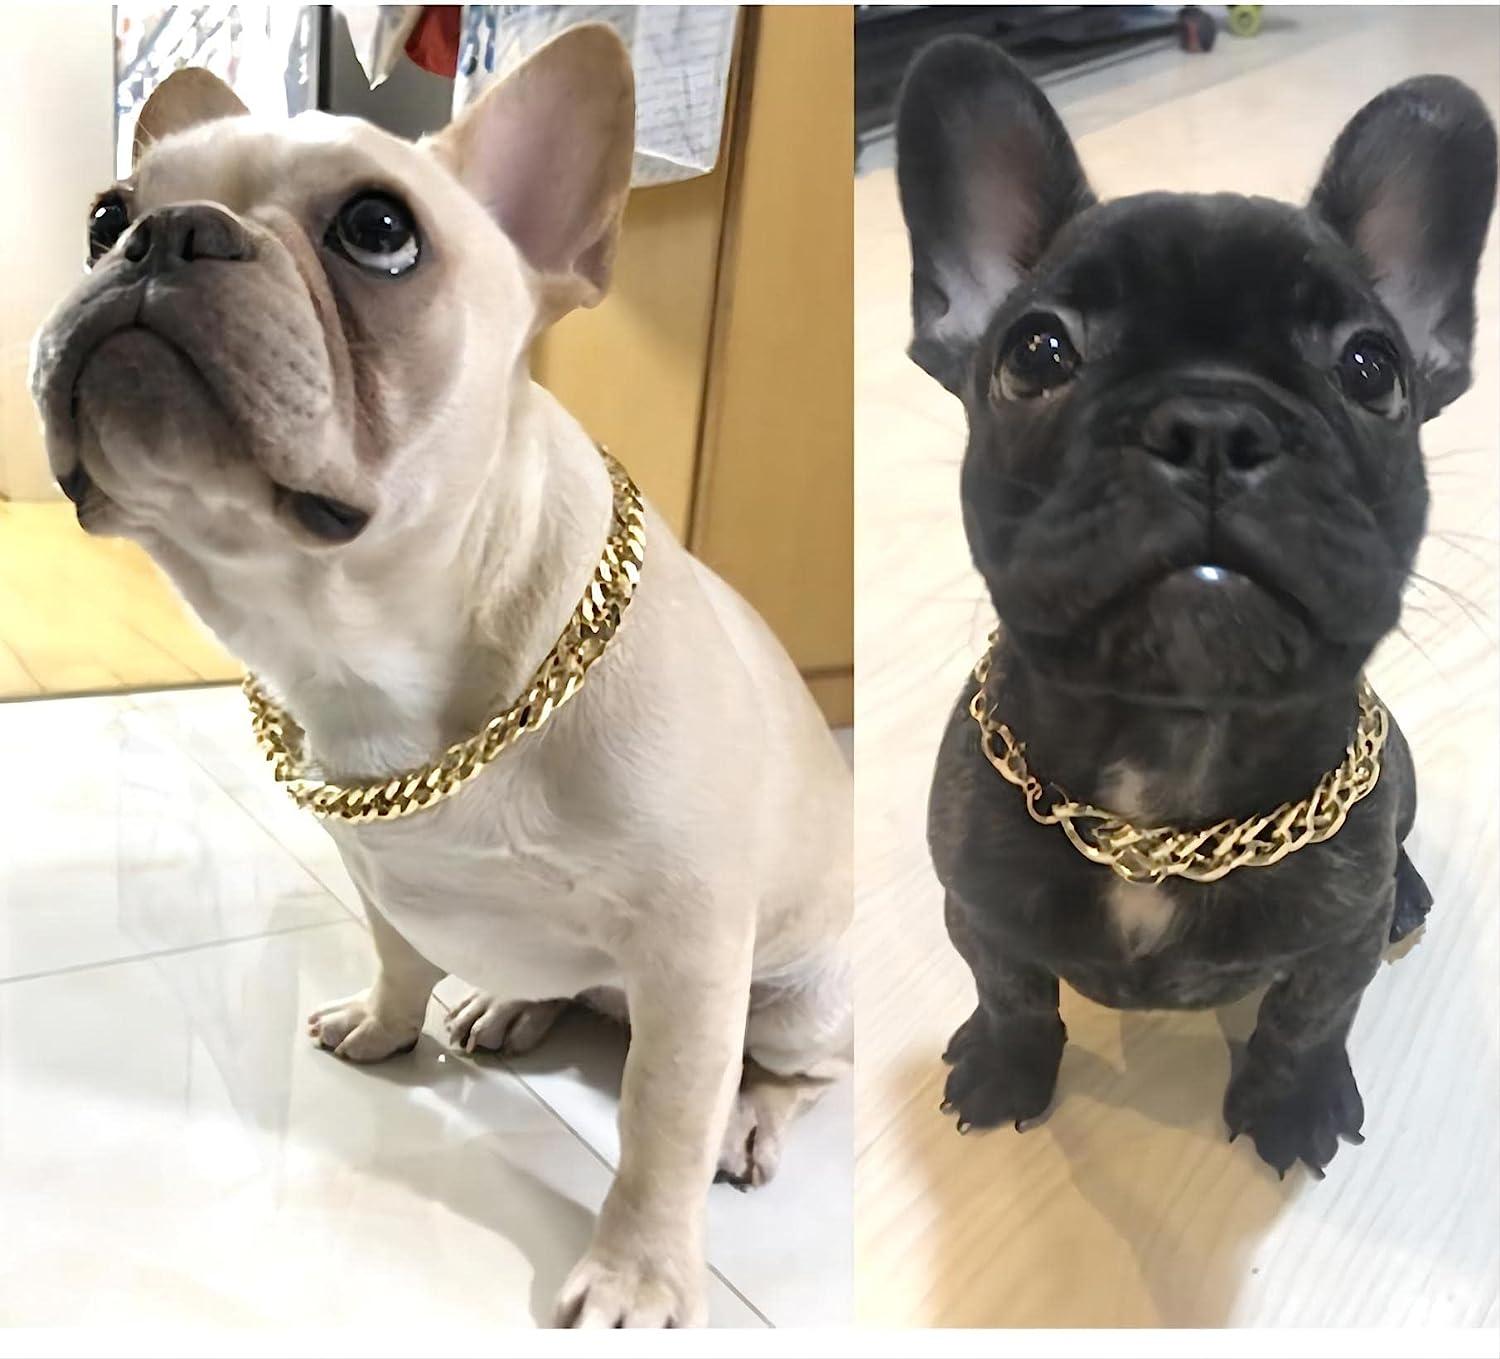 Gold Link Chain Dog Collar - Tiny Bling for Small Dogs or Puppies -  Lightweight Braided Metal Look - Fits Chihuahua, Yorkie, Mini Breeds - Pet  Jewelry & Accessories 